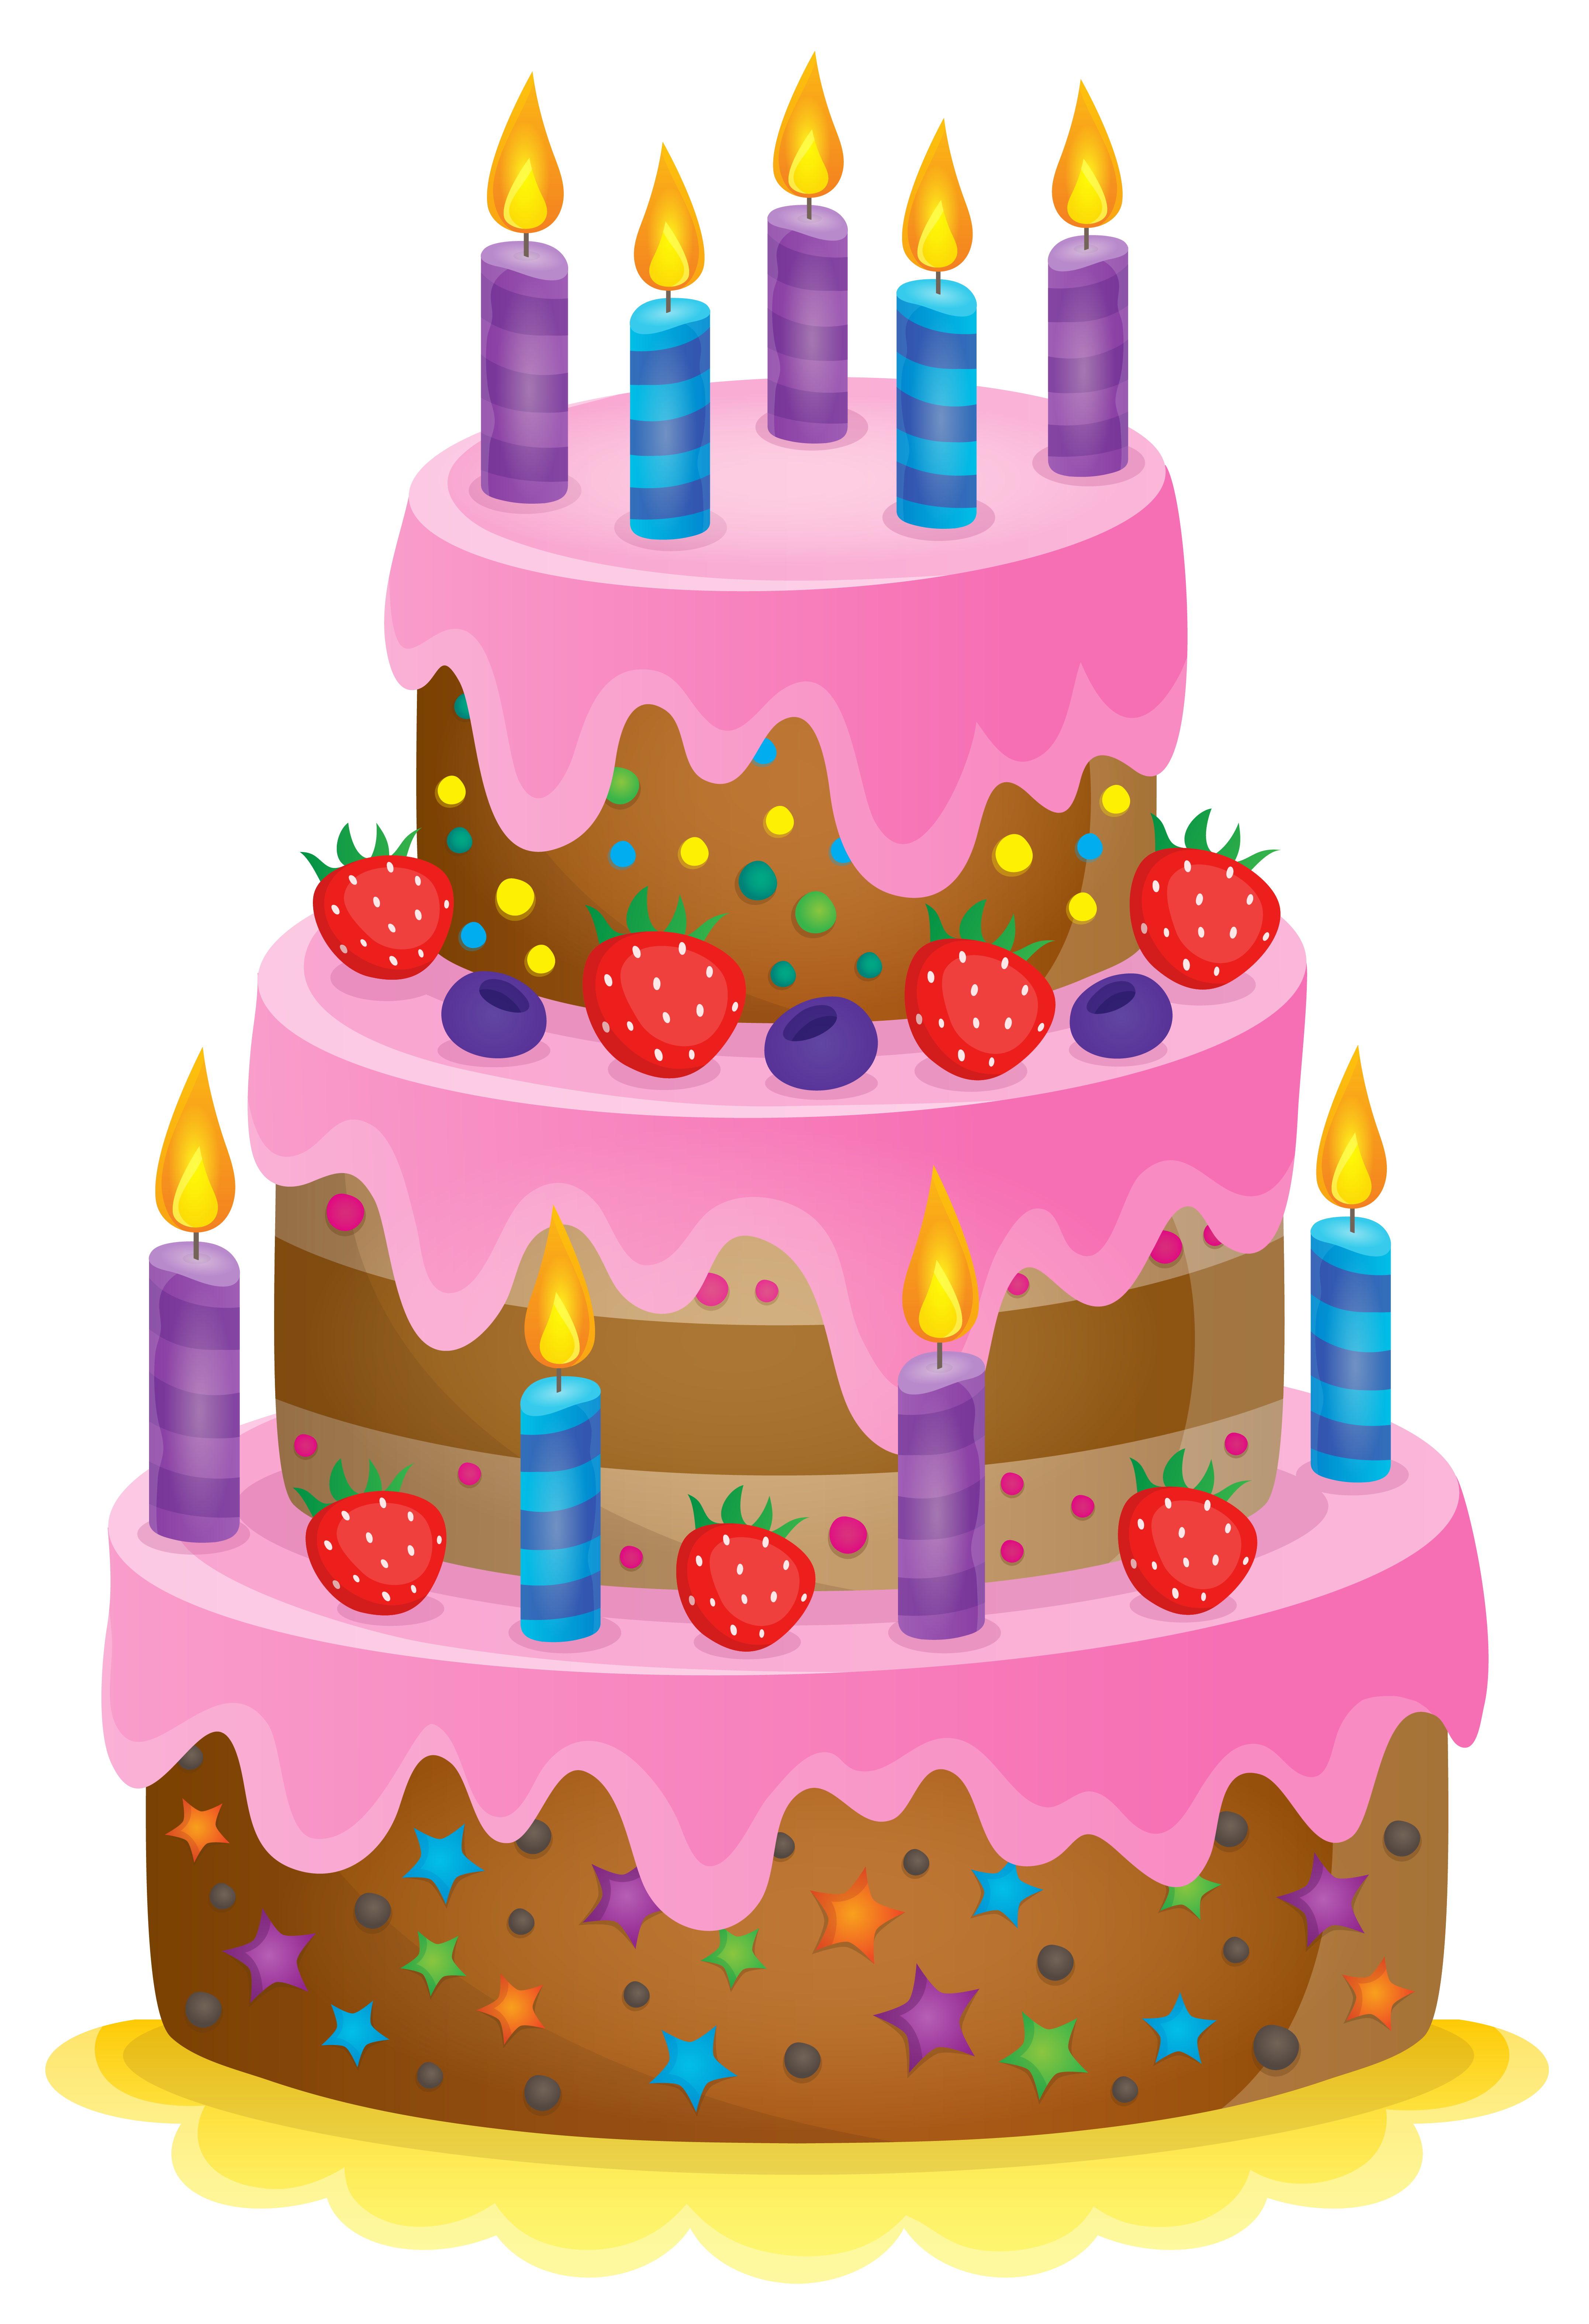 Birthday cake Chocolate cake Clip art - Cute Cake PNG Clipart Image png ...